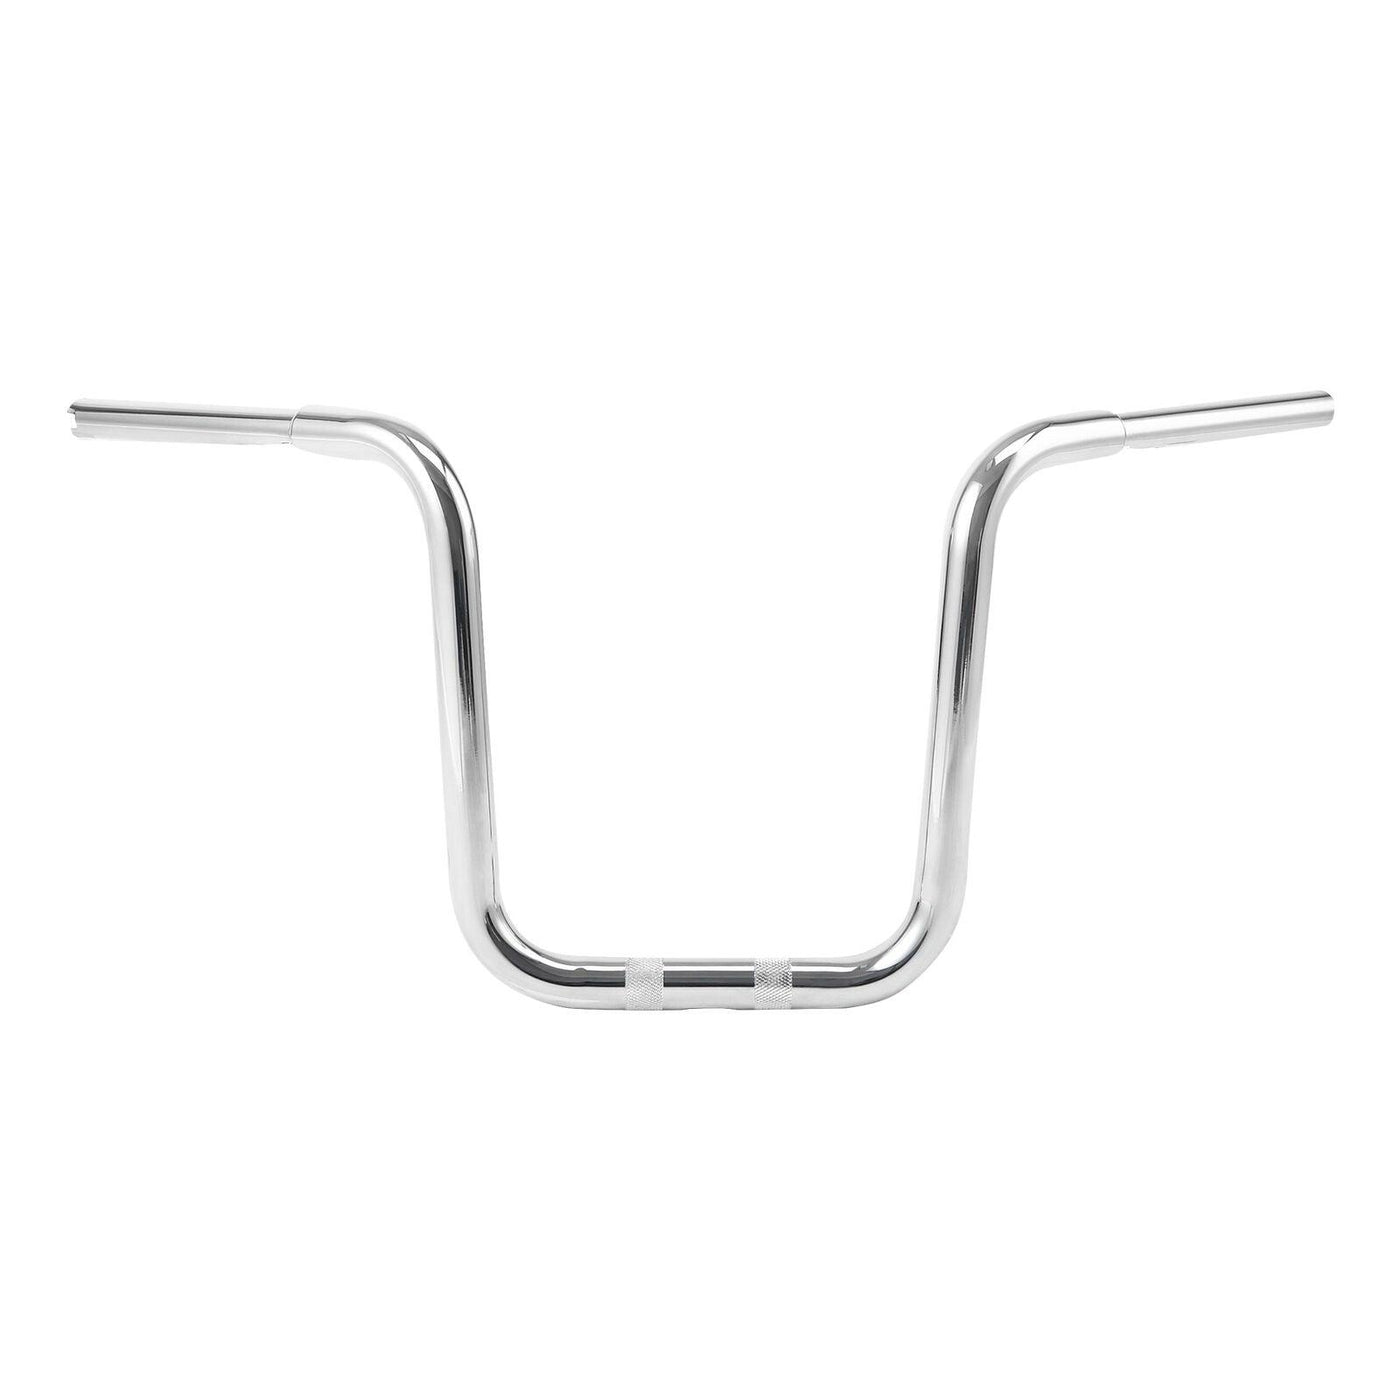 1 1/4" Fat 14" Rise Handlebar Fit For Harley Touring Fat Boy Low Rider FXBB - Moto Life Products